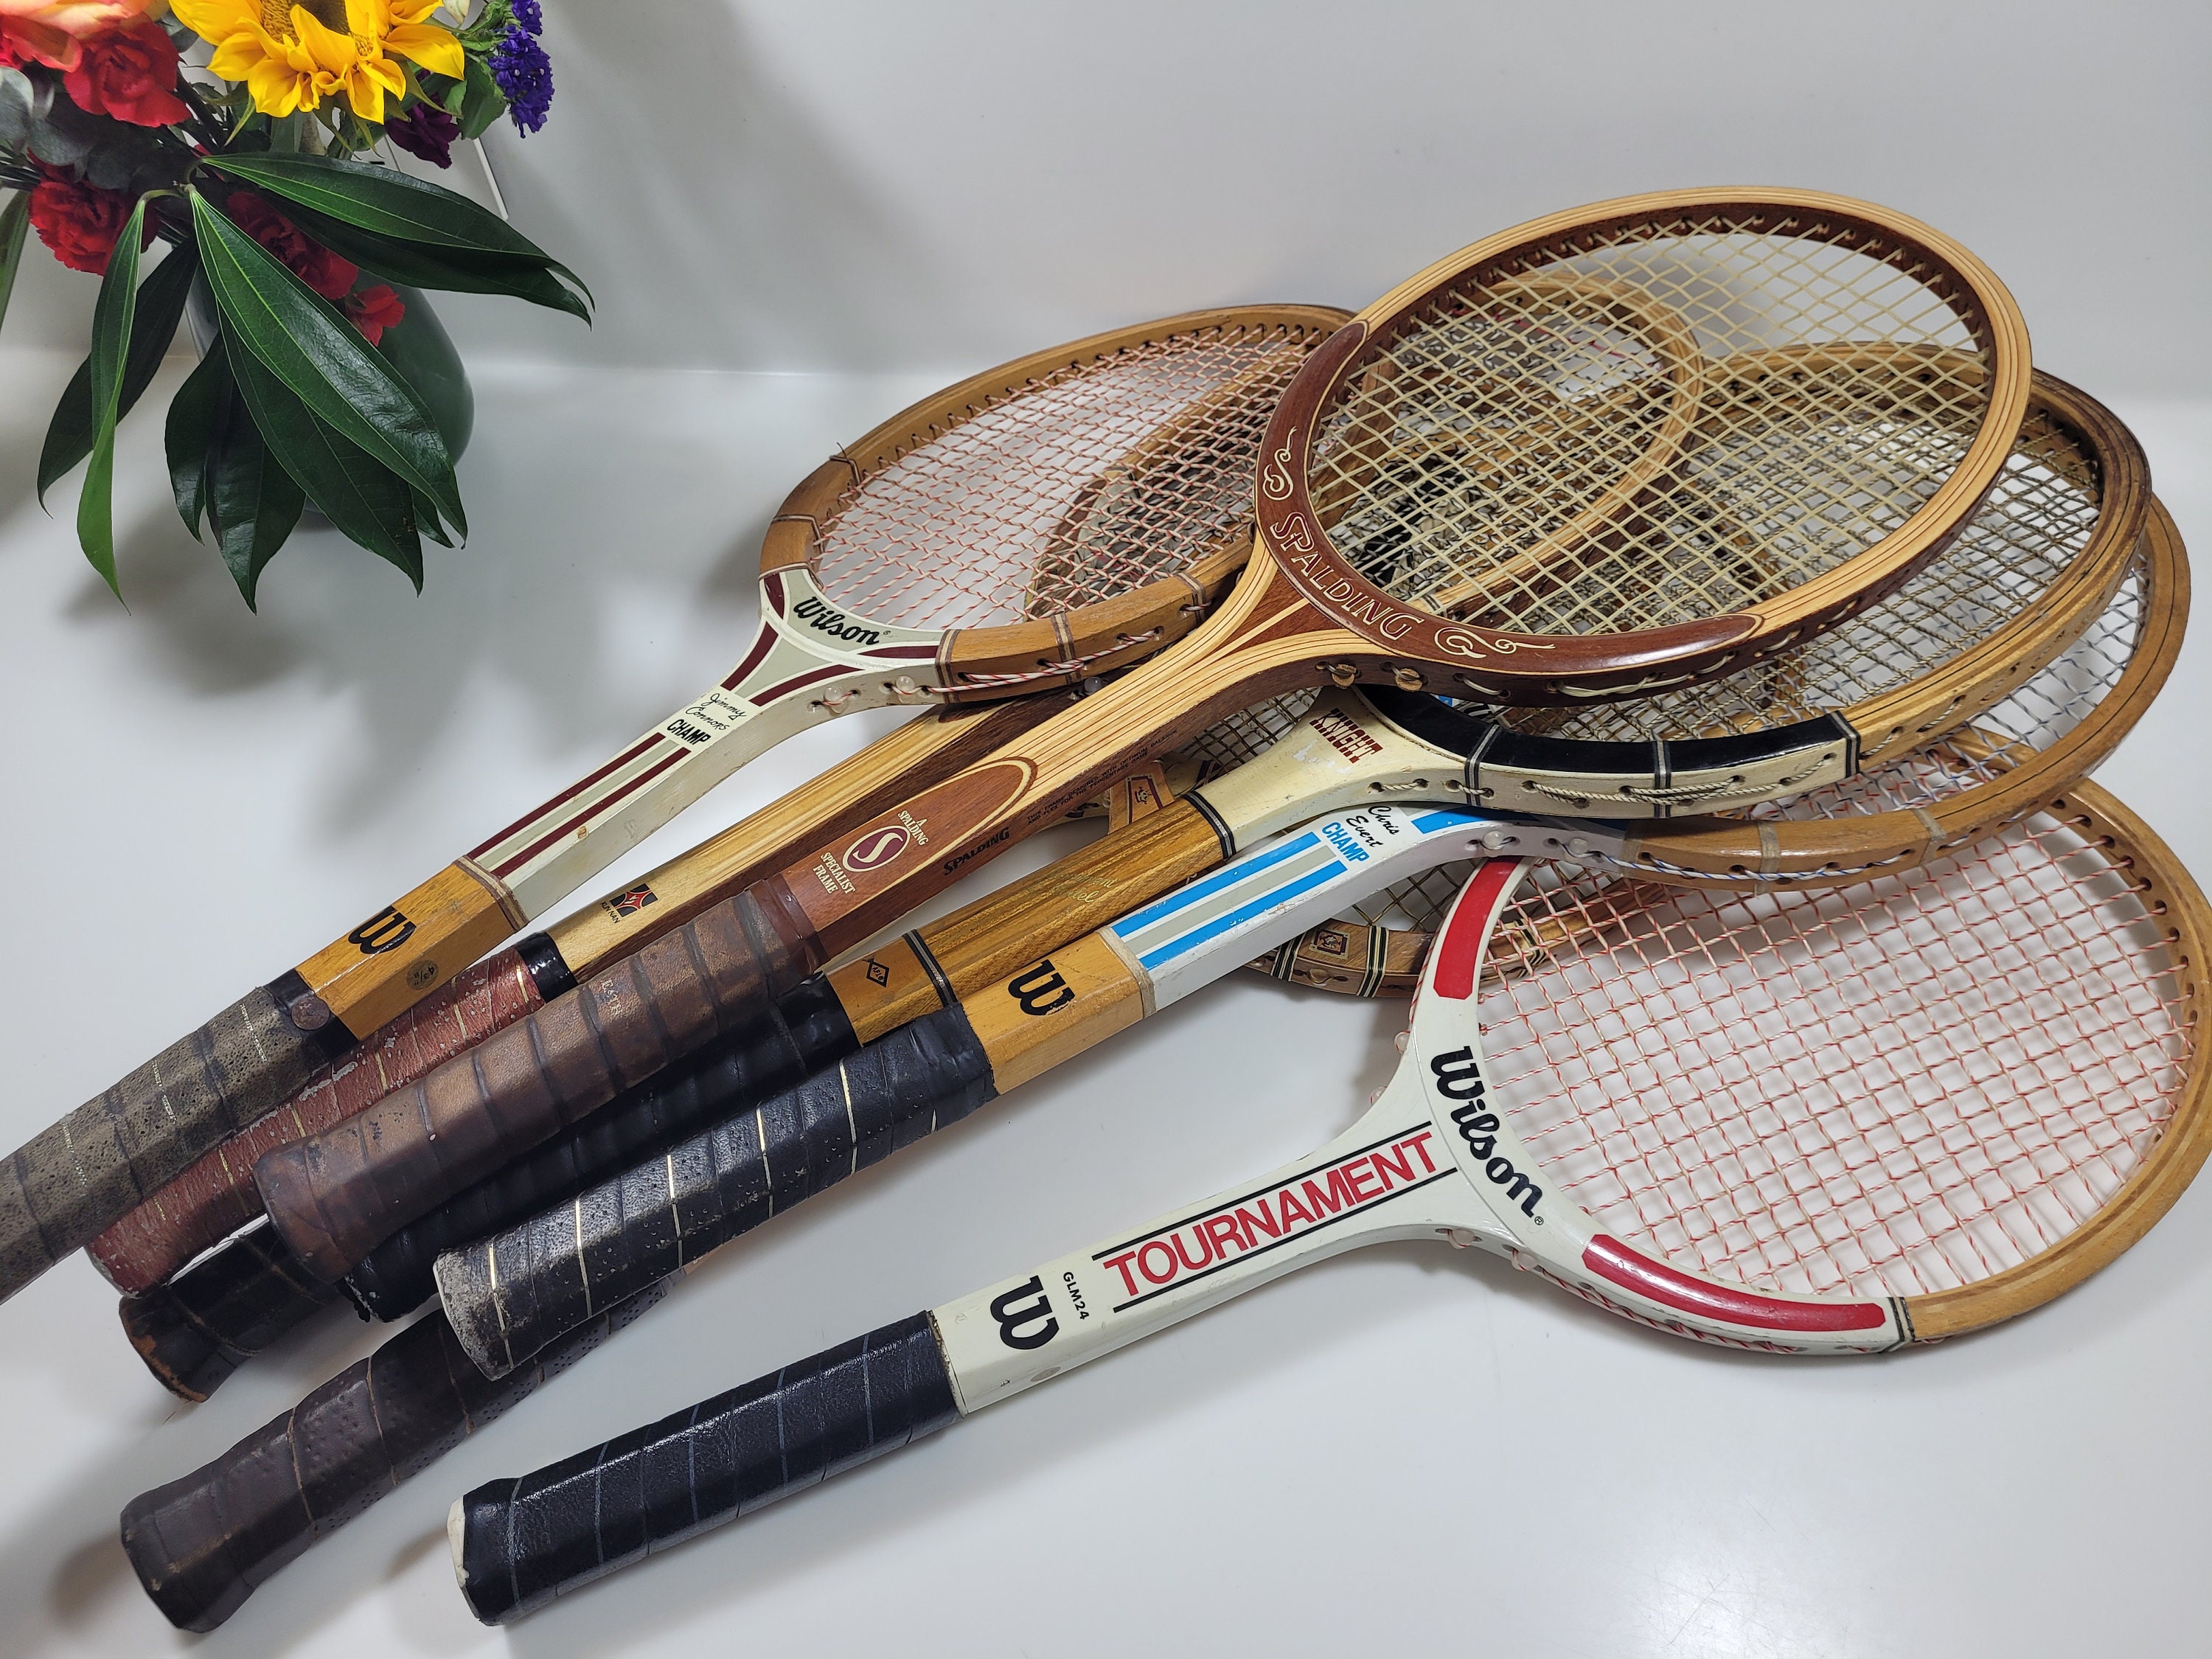 Buy Louis Vuitton Tennis Racket Cover Squash Pickleball Cover Online in  India 